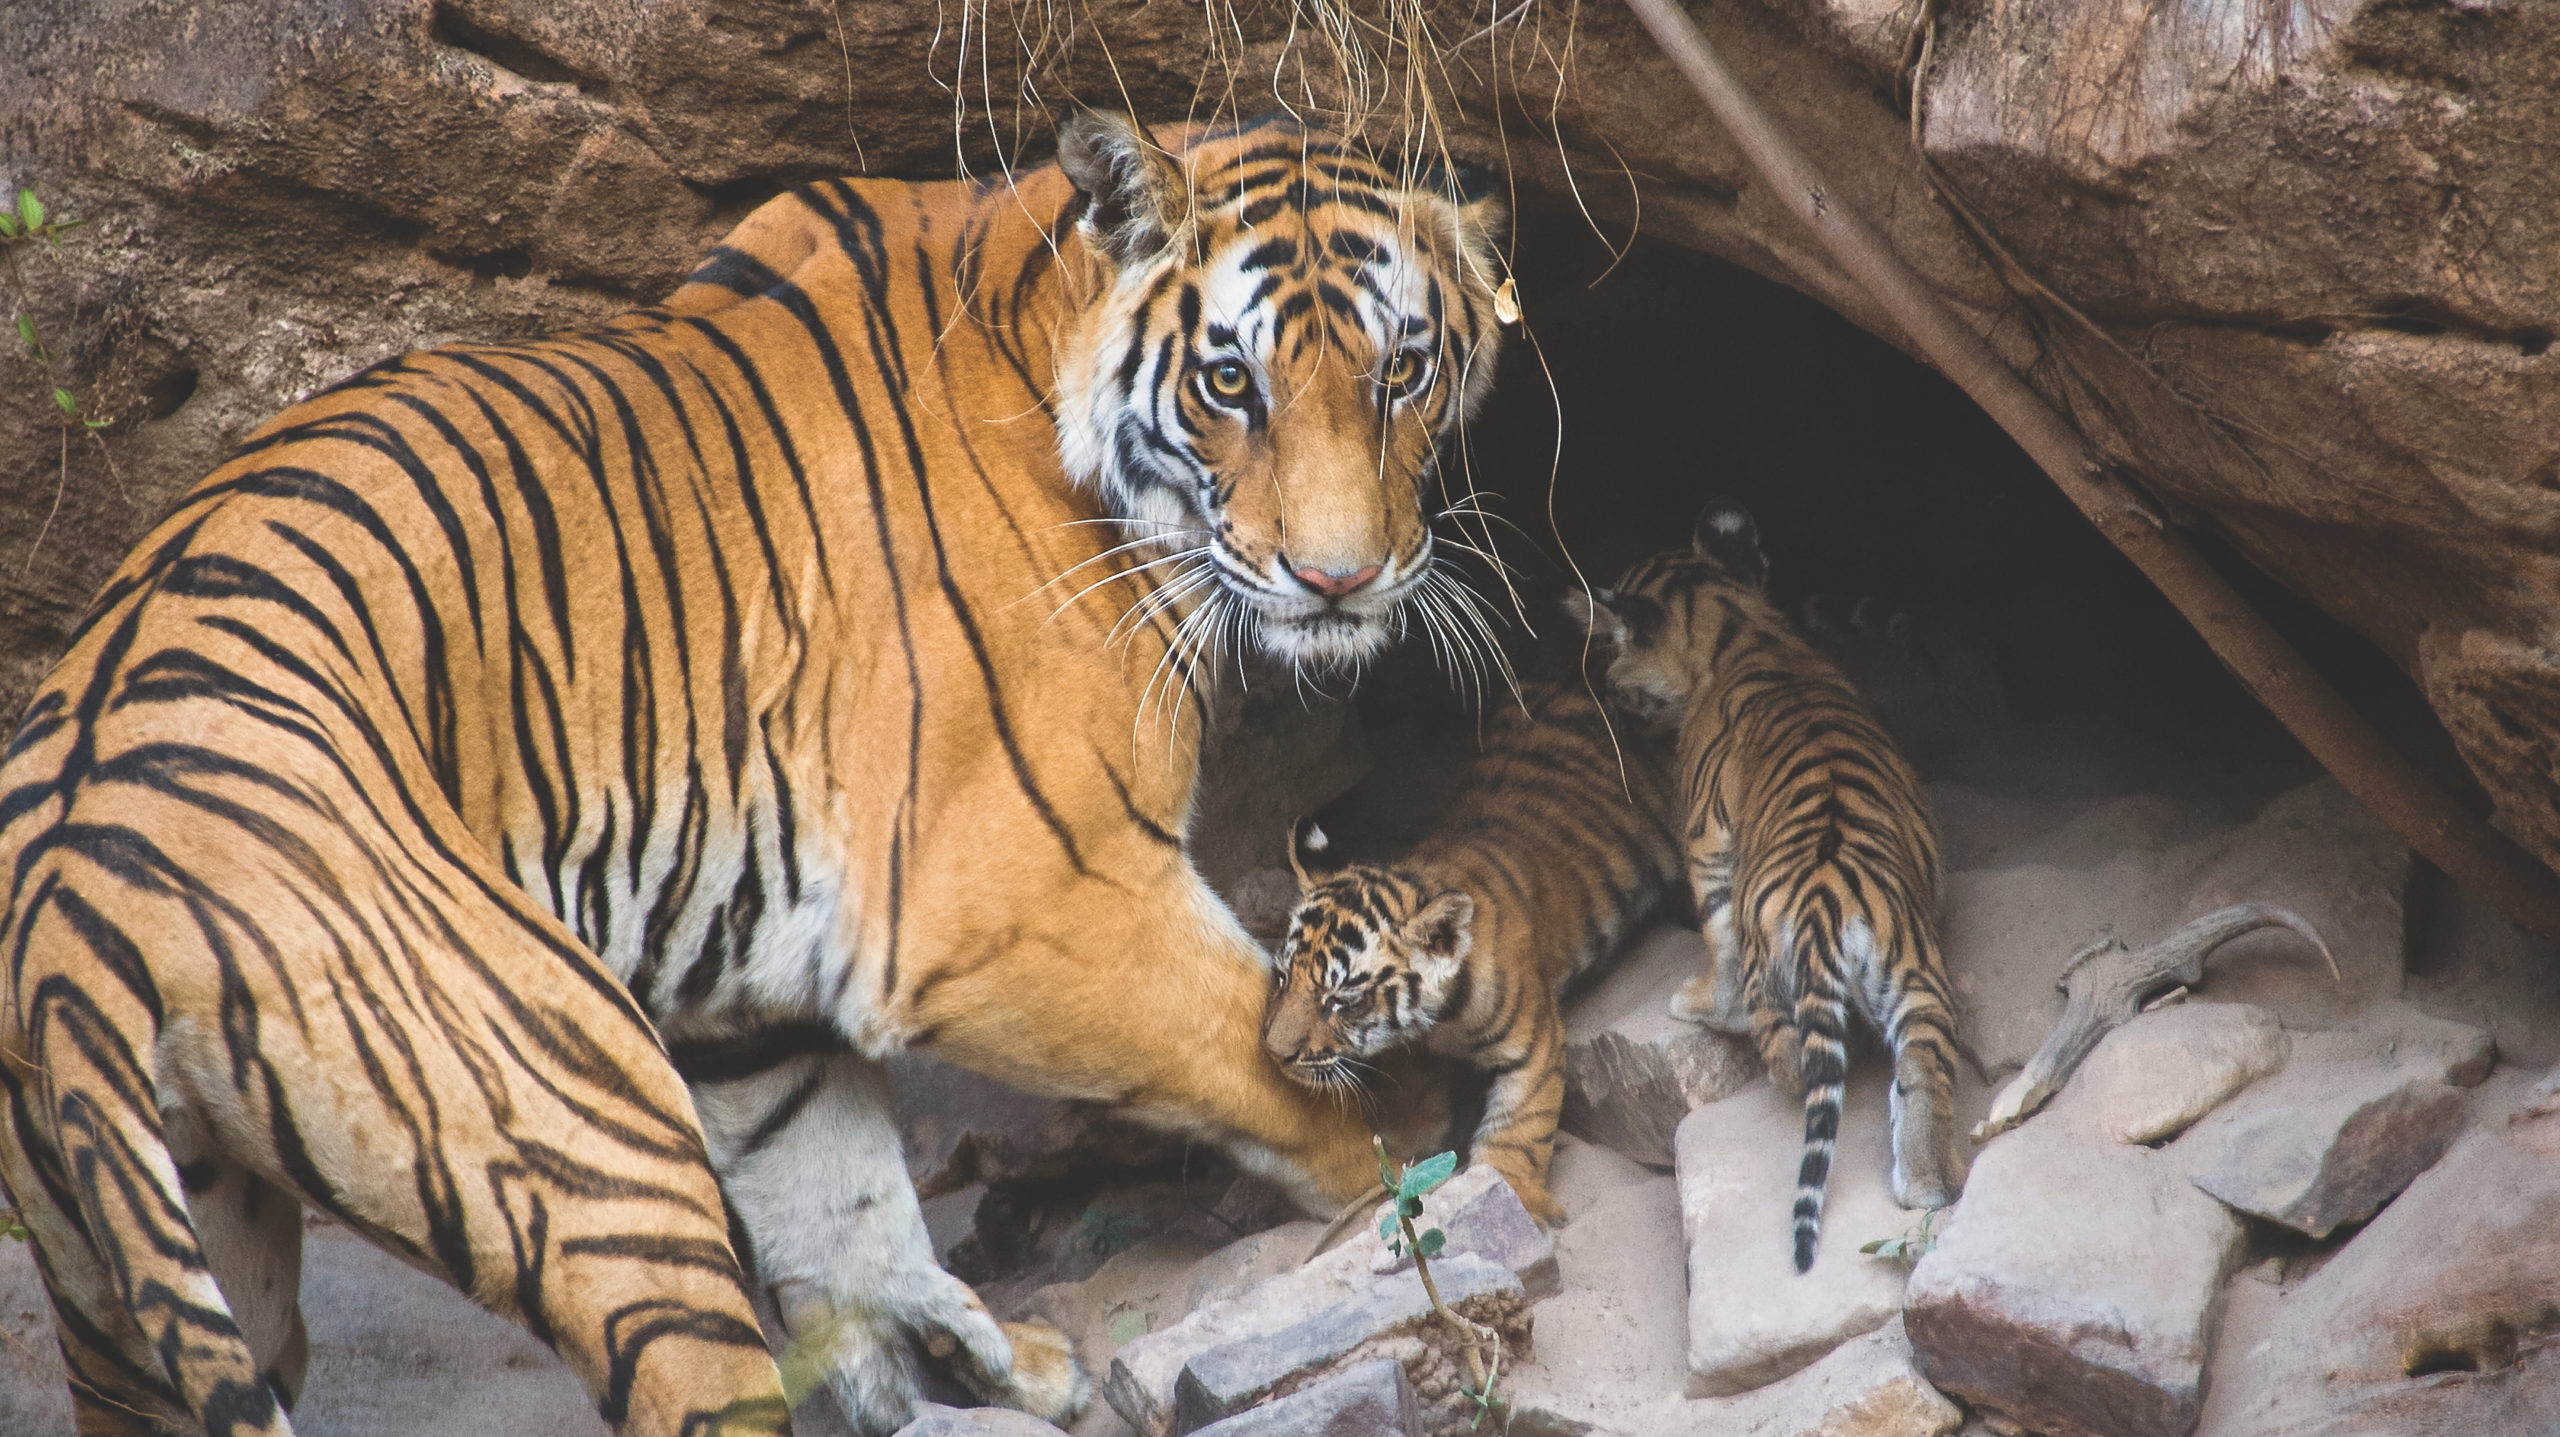 A tiger mum with two of her four cubs just outside her natal den in Bandhavgarh National Park in India. (Photo: Suzi Eszterhas/New On Earth: Baby Animals in the Wild/courtesy of Earth Aware Editions)